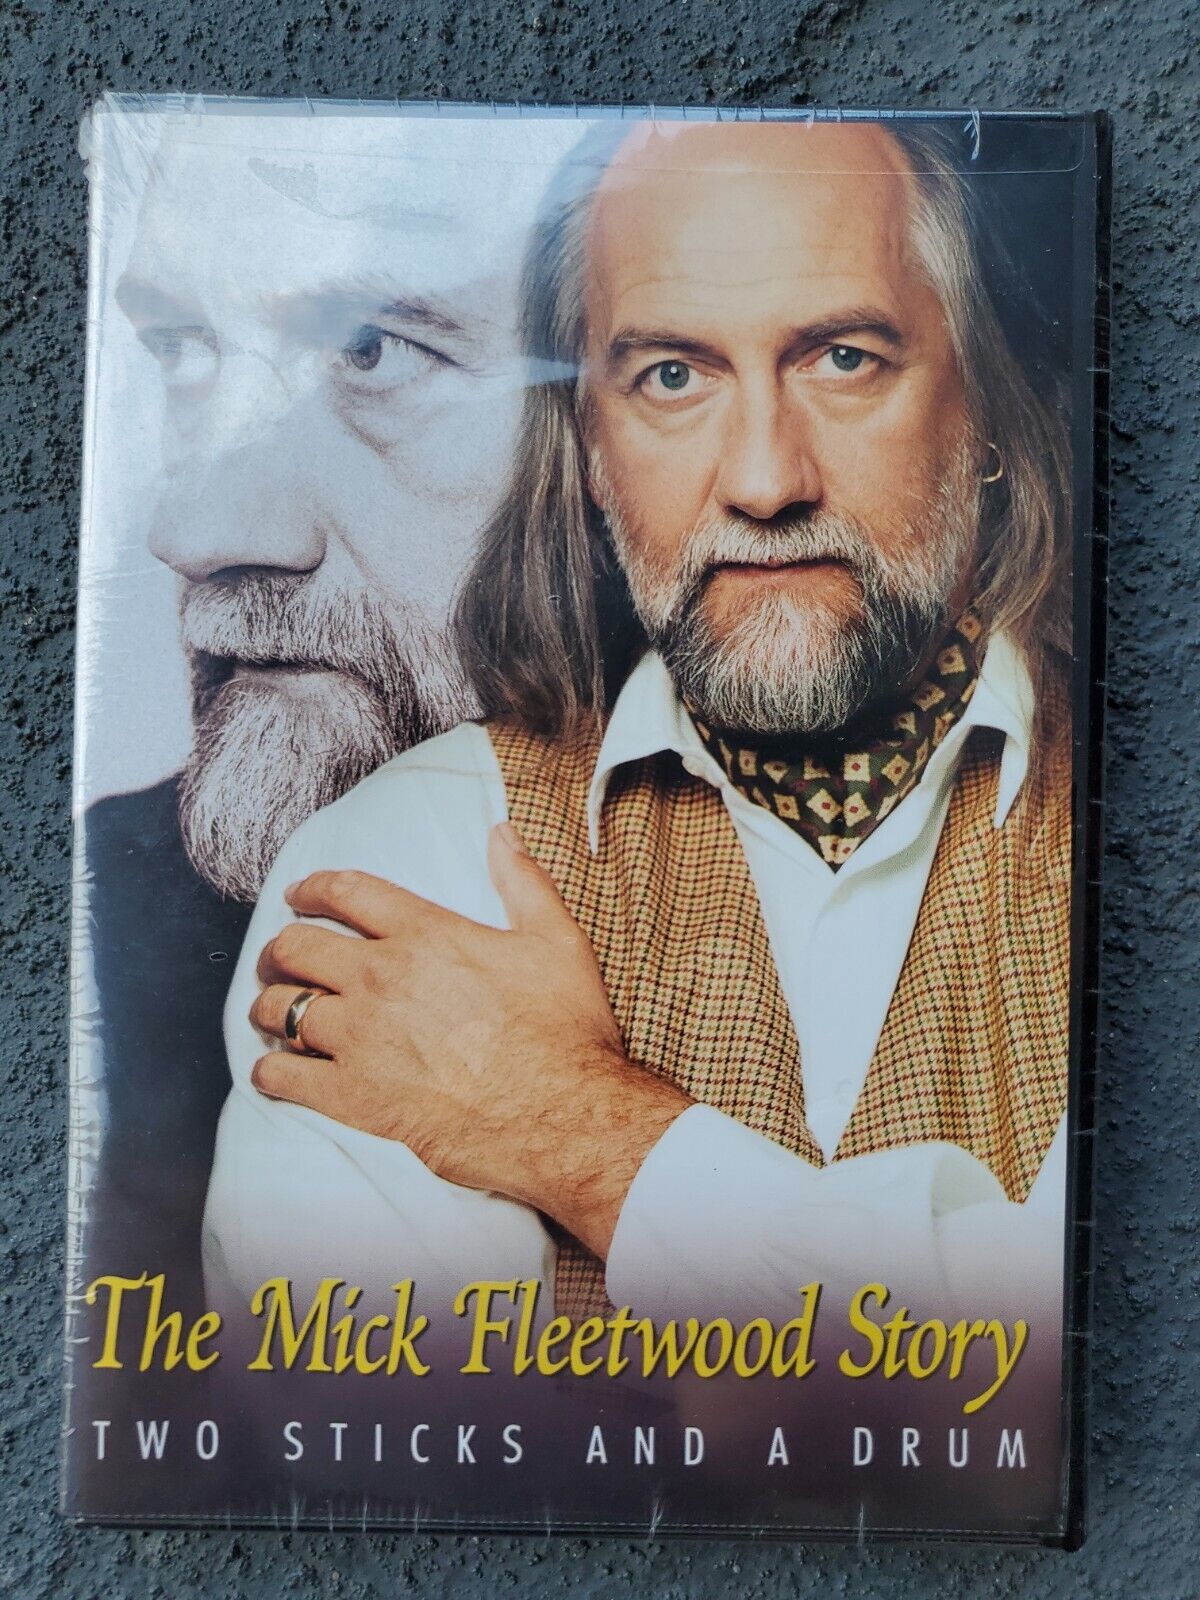 The Mick Fleetwood Story: Two Sticks and a Drum/2000/New Sealed DVD/Stevie Nicks